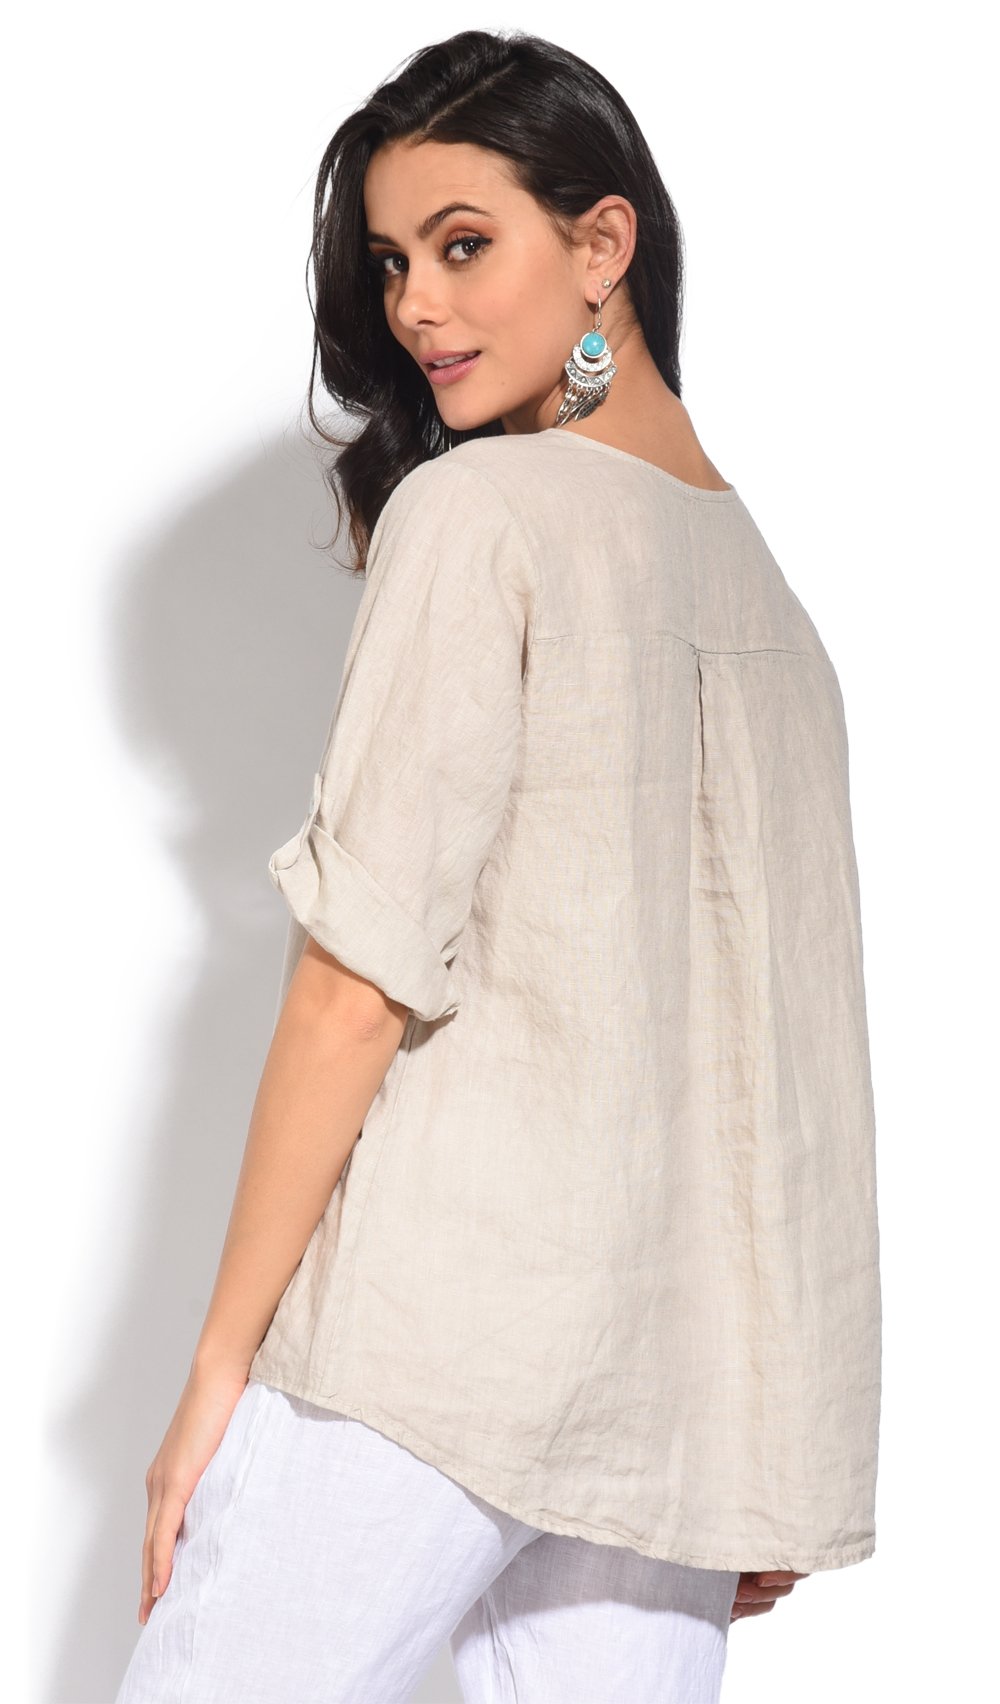 TUNISIAN COLLAR TOP WITH LONG ATTACHABLE SLEEVES